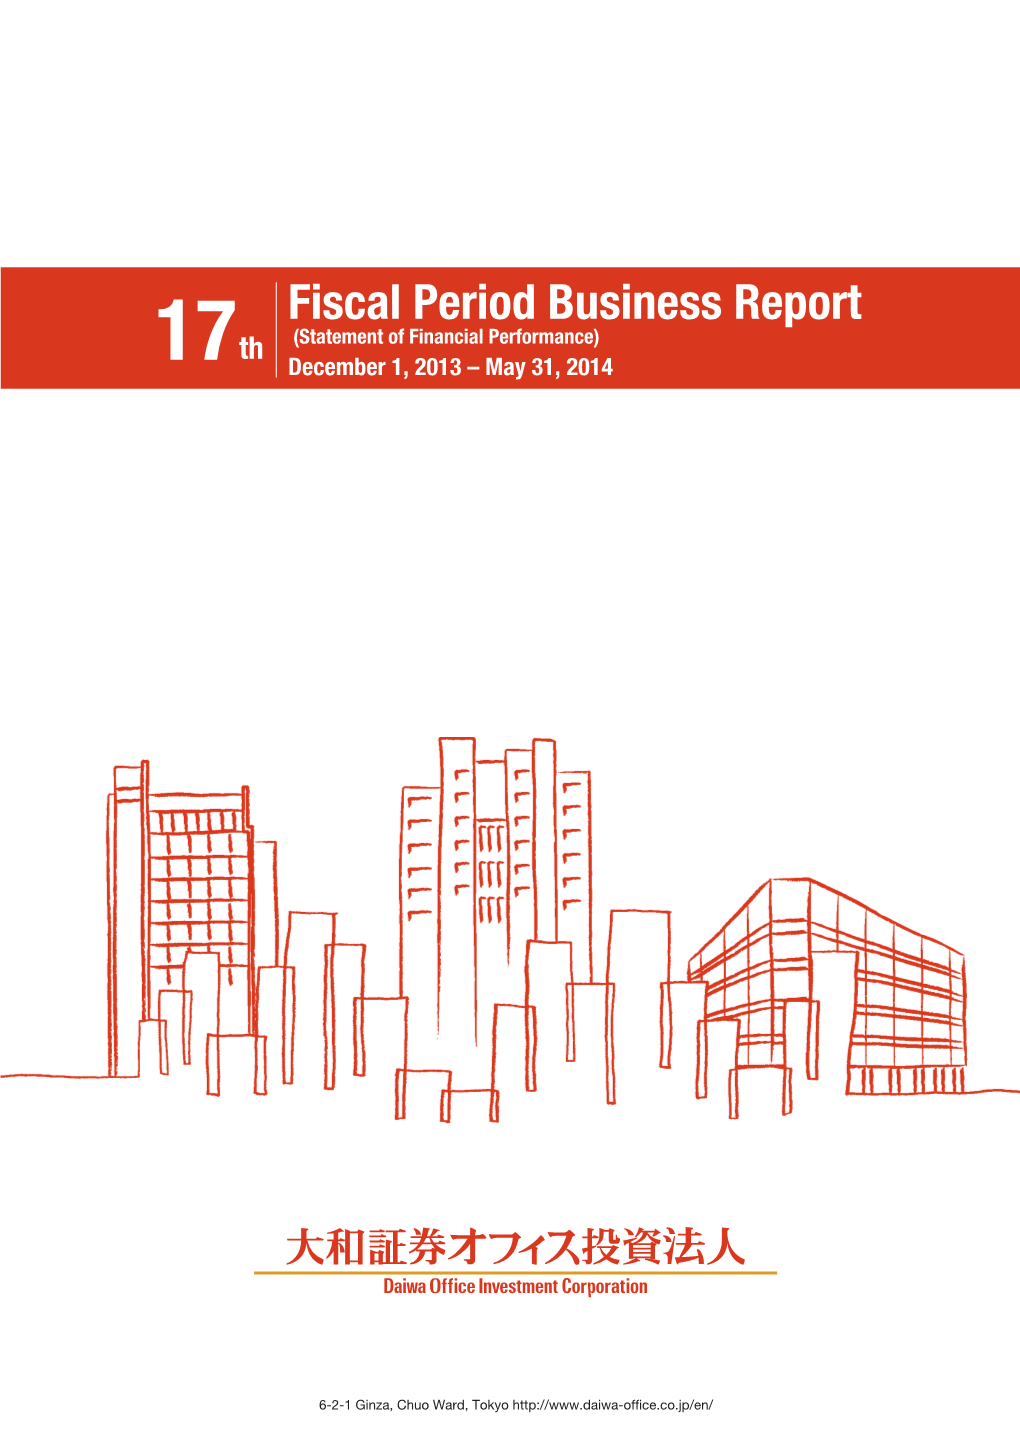 Fiscal Period Business Report Th (Statement of Financial Performance) 17 December 1, 2013 – May 31, 2014